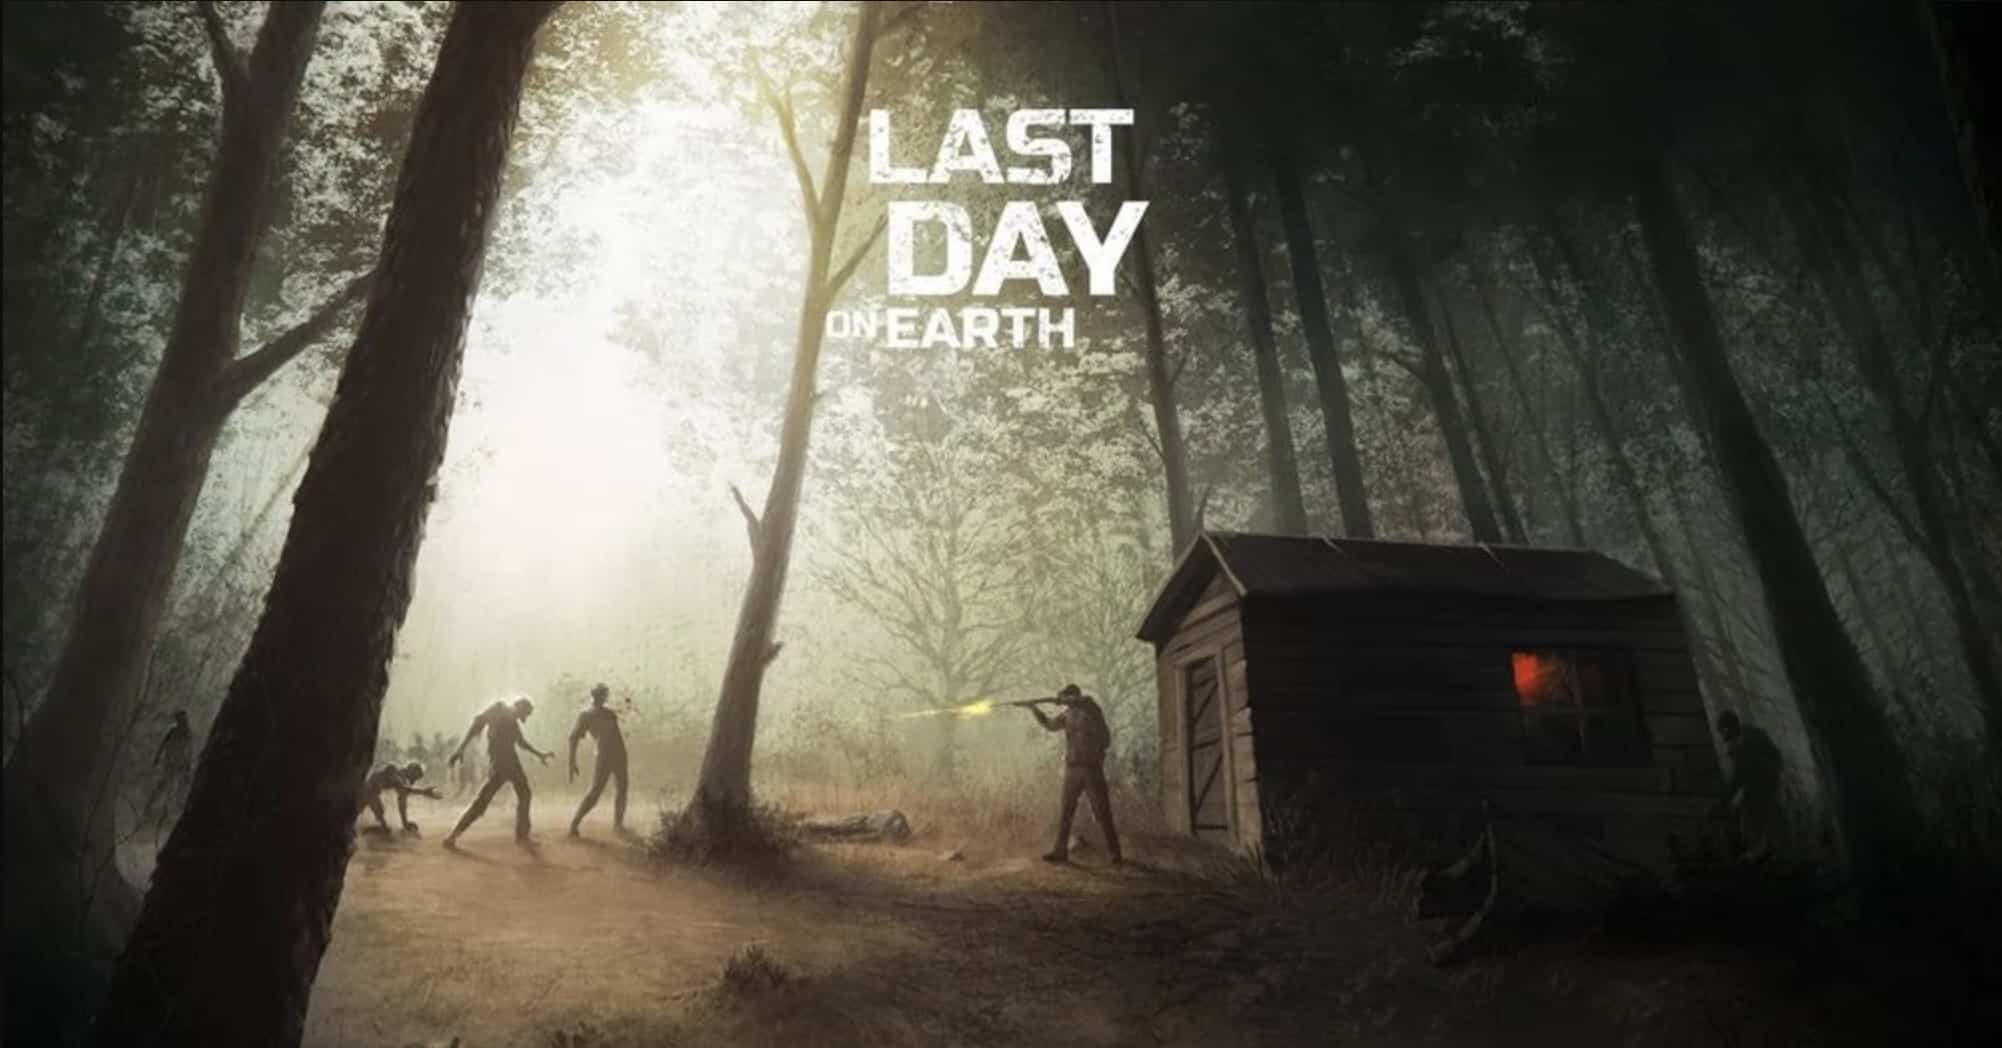 Ласт дау. Ласт дей. Last Day on Earth. Last Day on Earth: Survival. Последний день на земле.